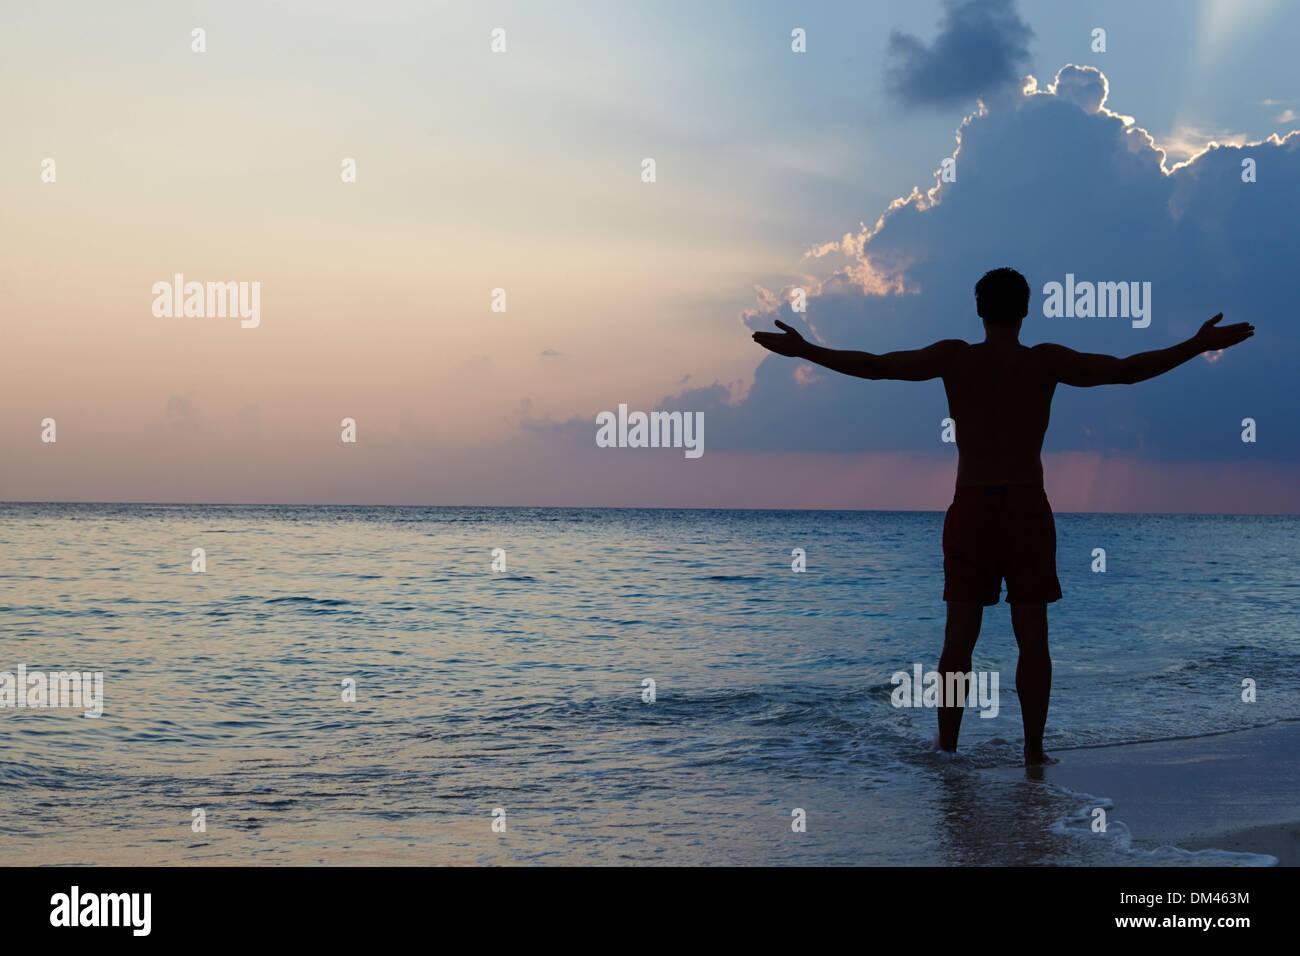 Silhouette Of Man With Outstretched Arms On Beach At Sunset Stock Photo